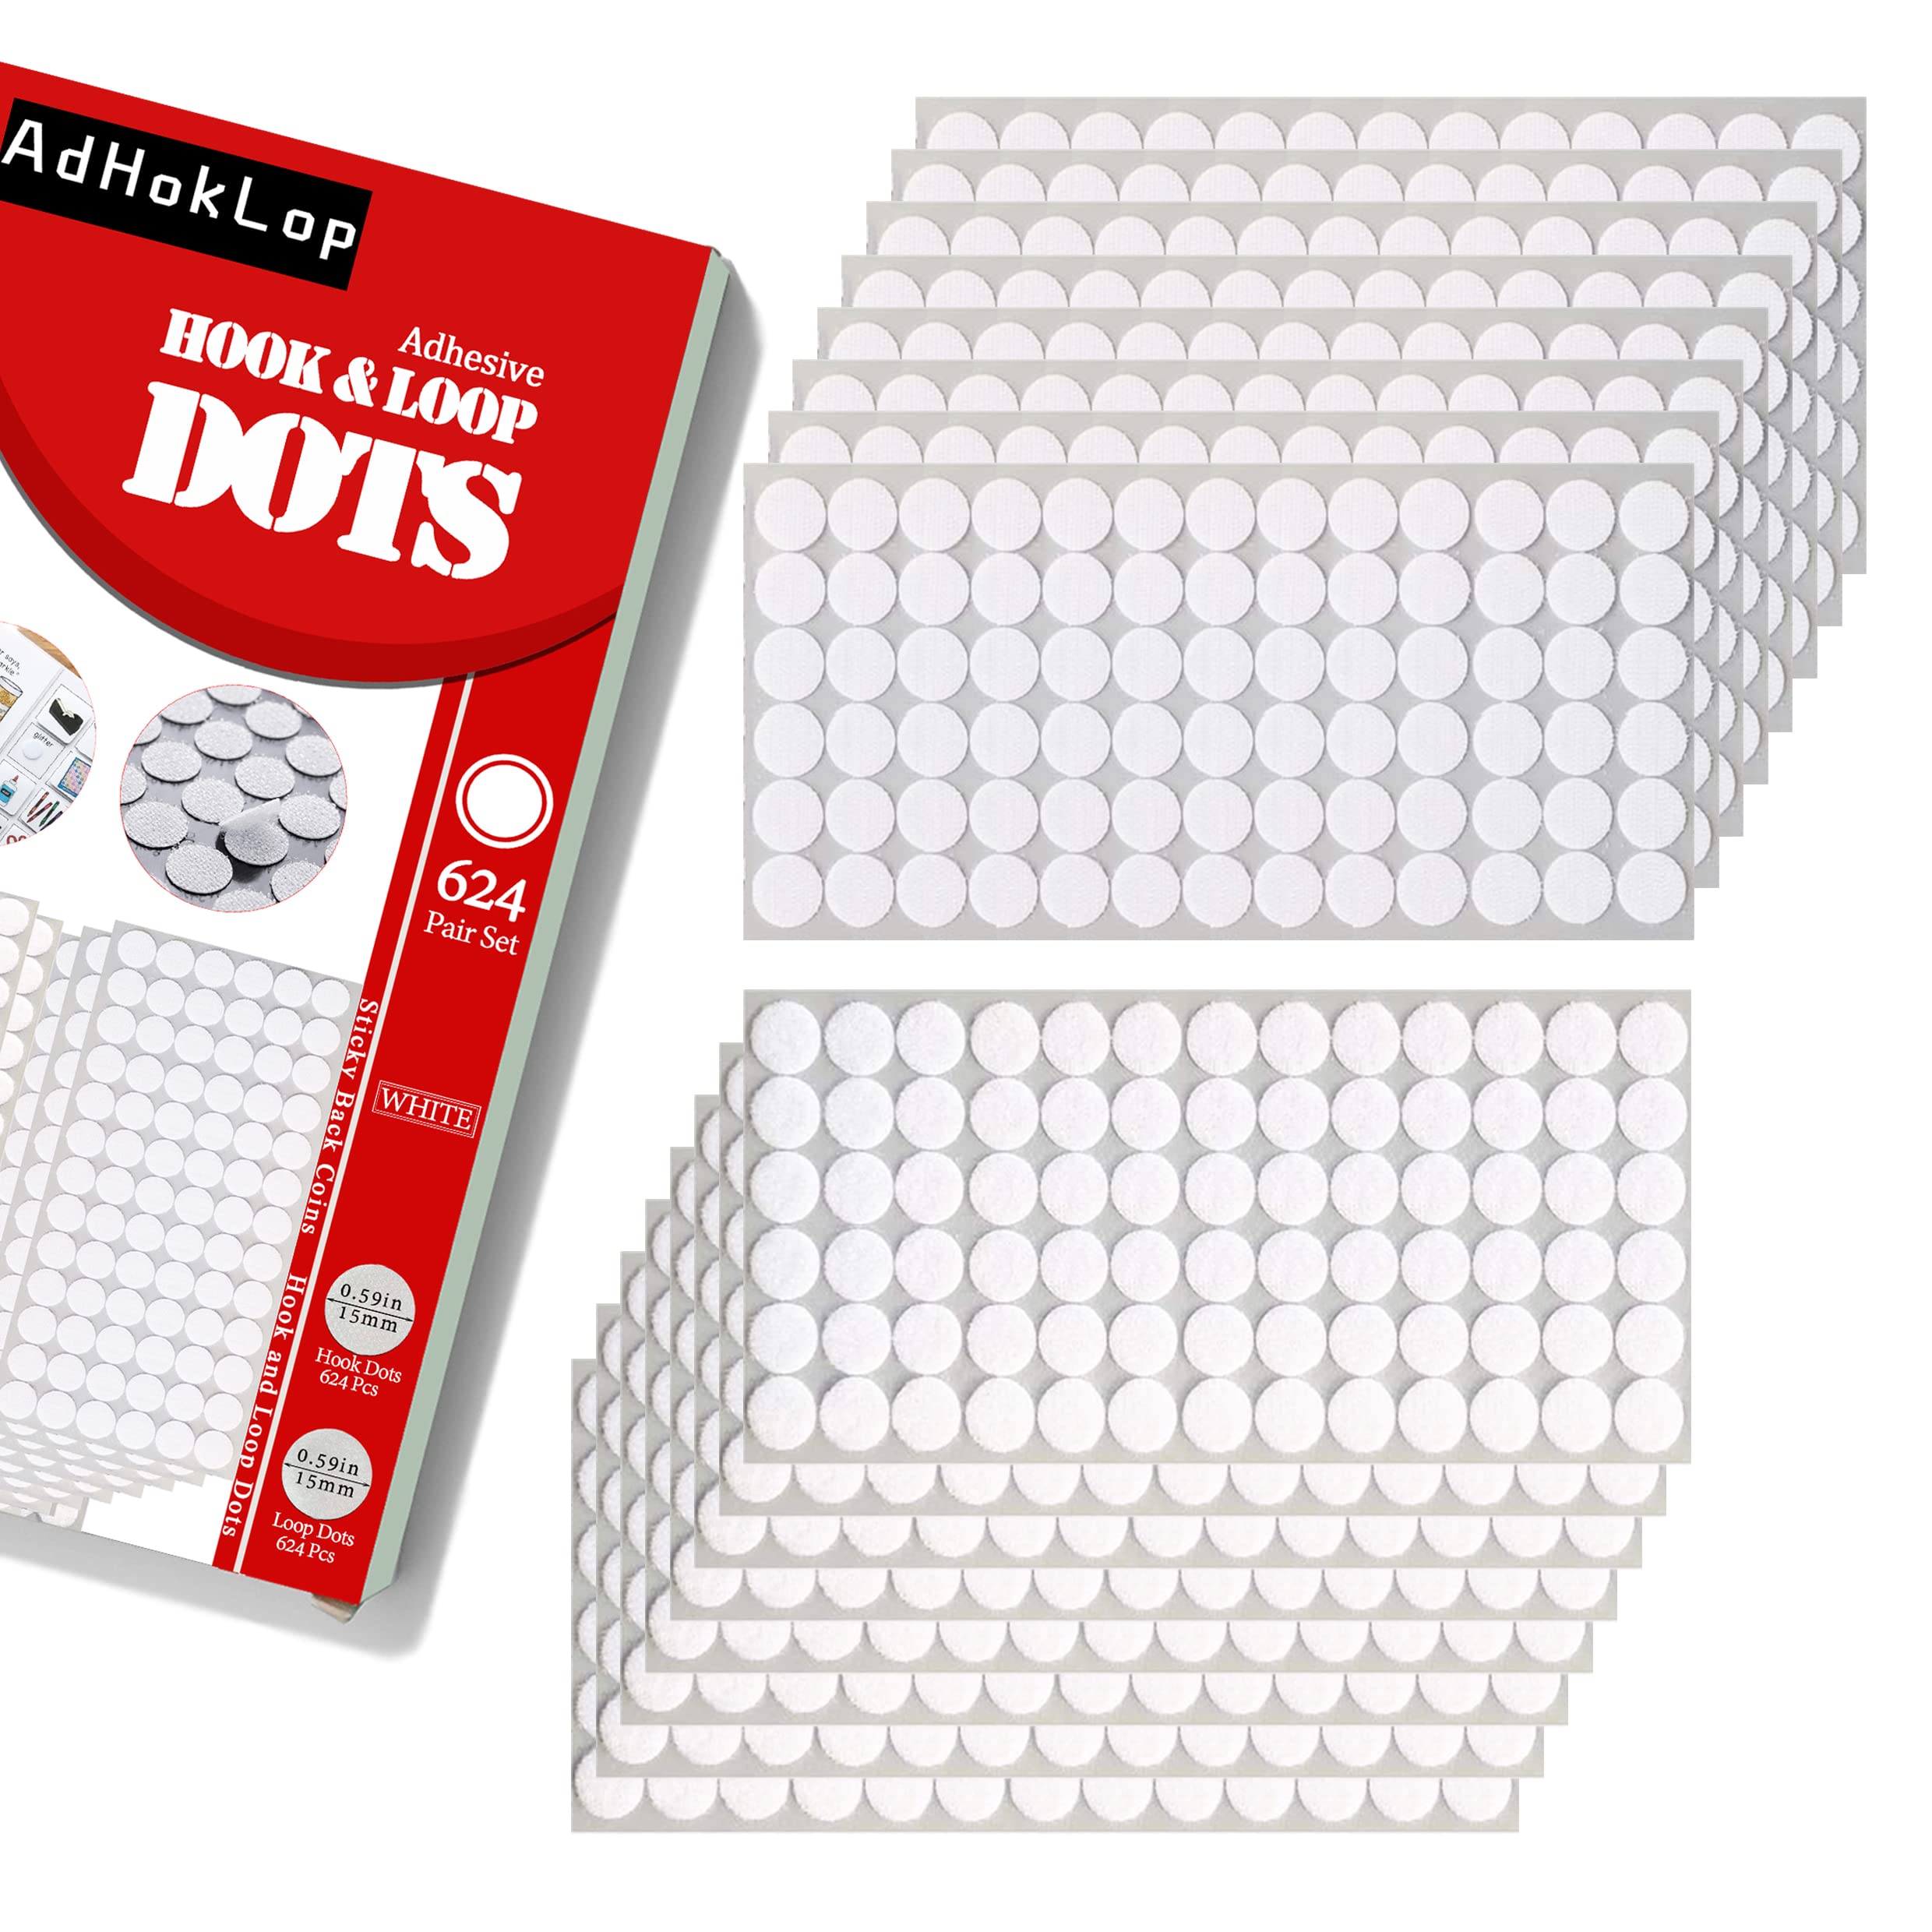  1000pcs Hook and Loop Dots 3/4 in Diameter Sticky Back